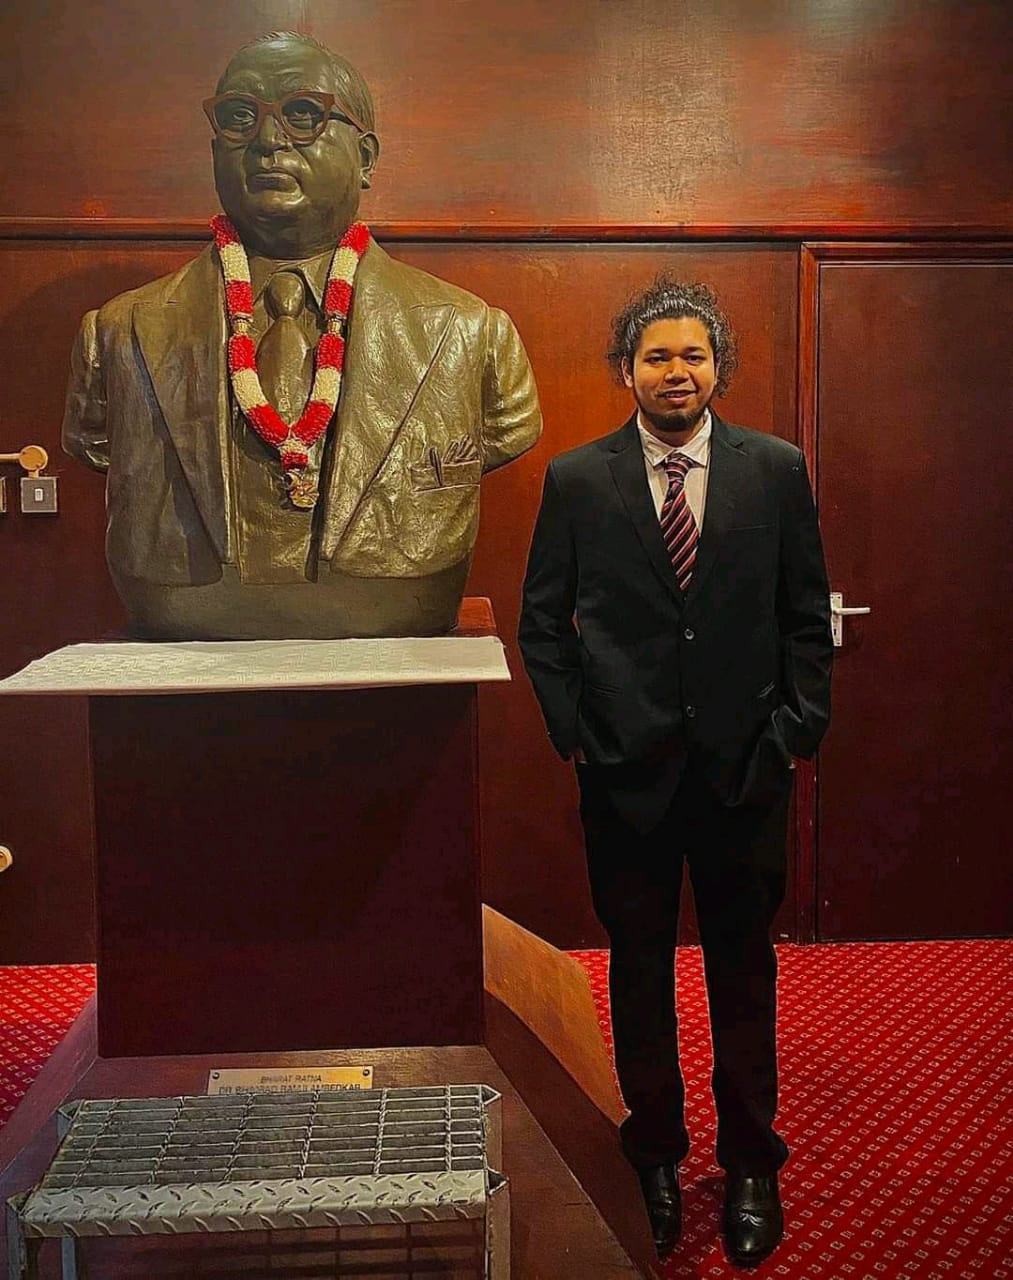 Ambedkar Bust of the Indian High commission, London